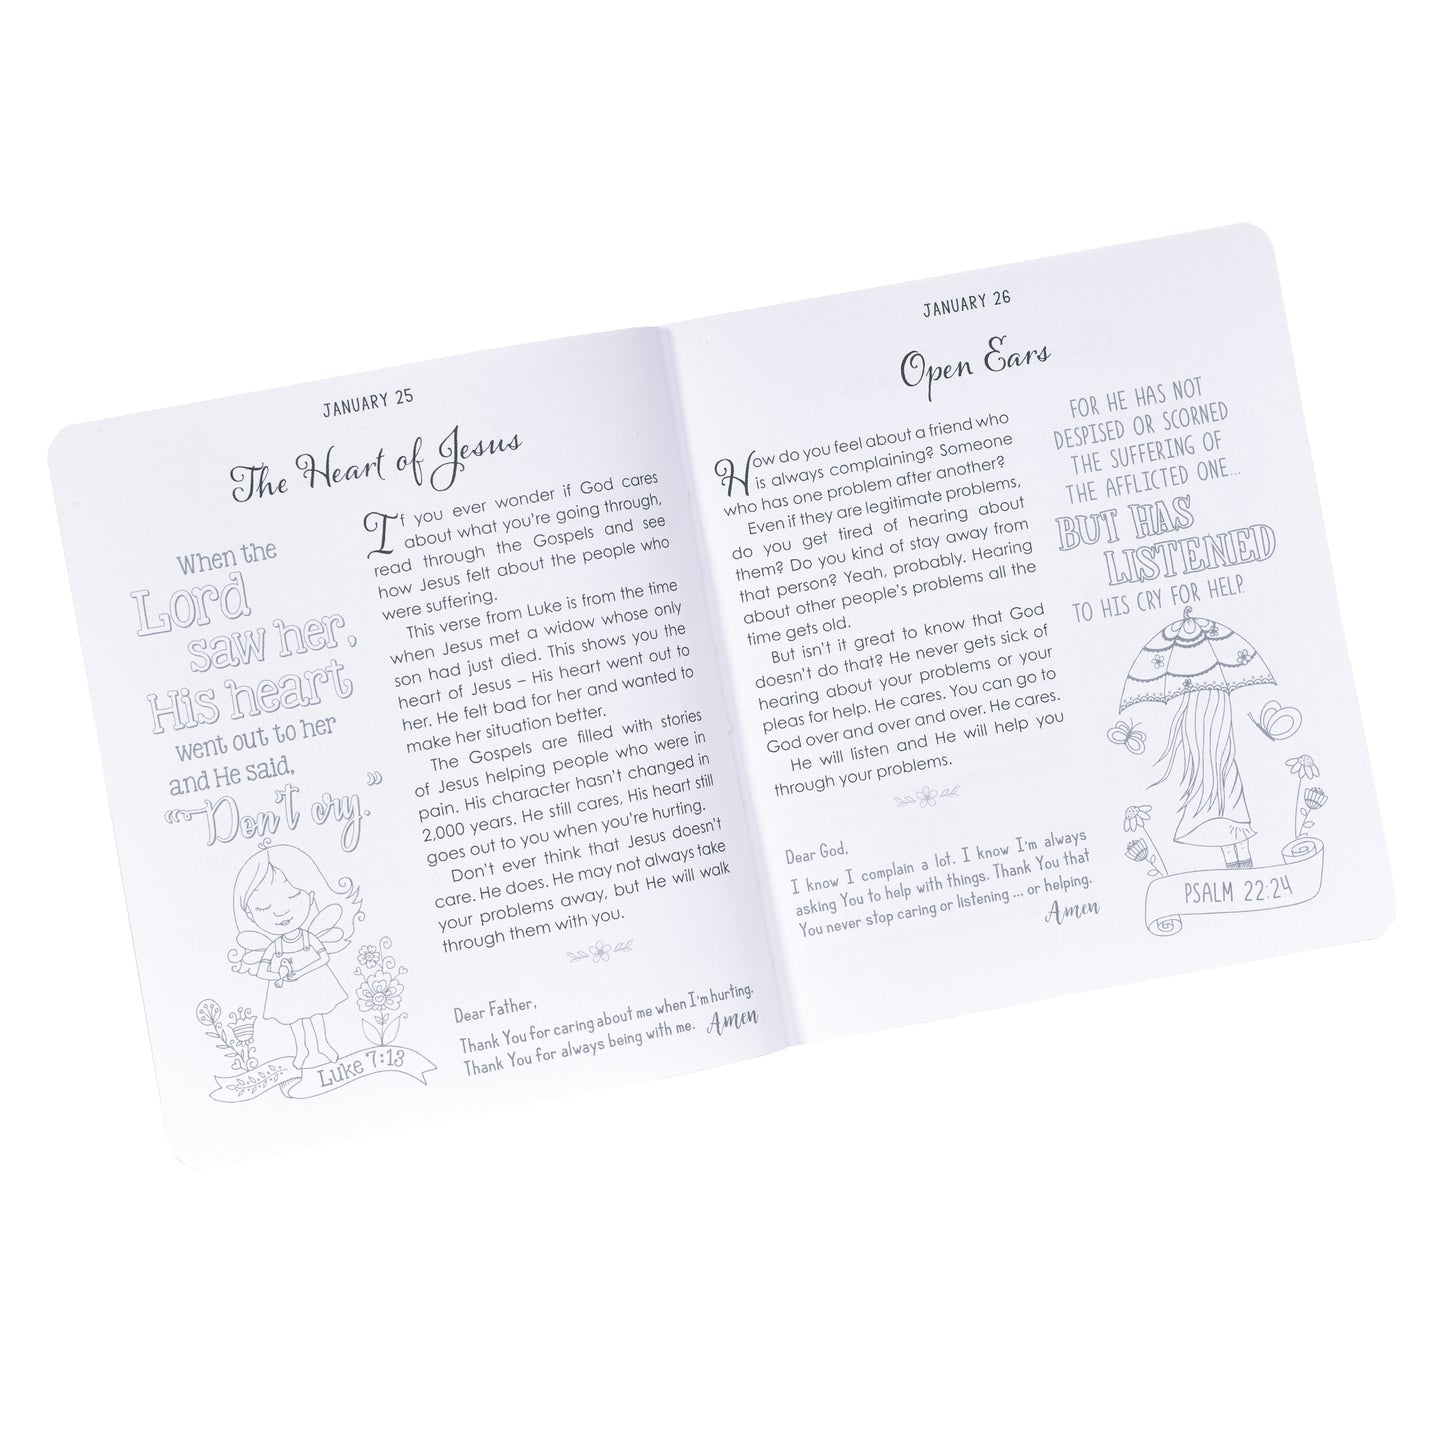 The Illustrated Devotional For Girls - The Christian Gift Company